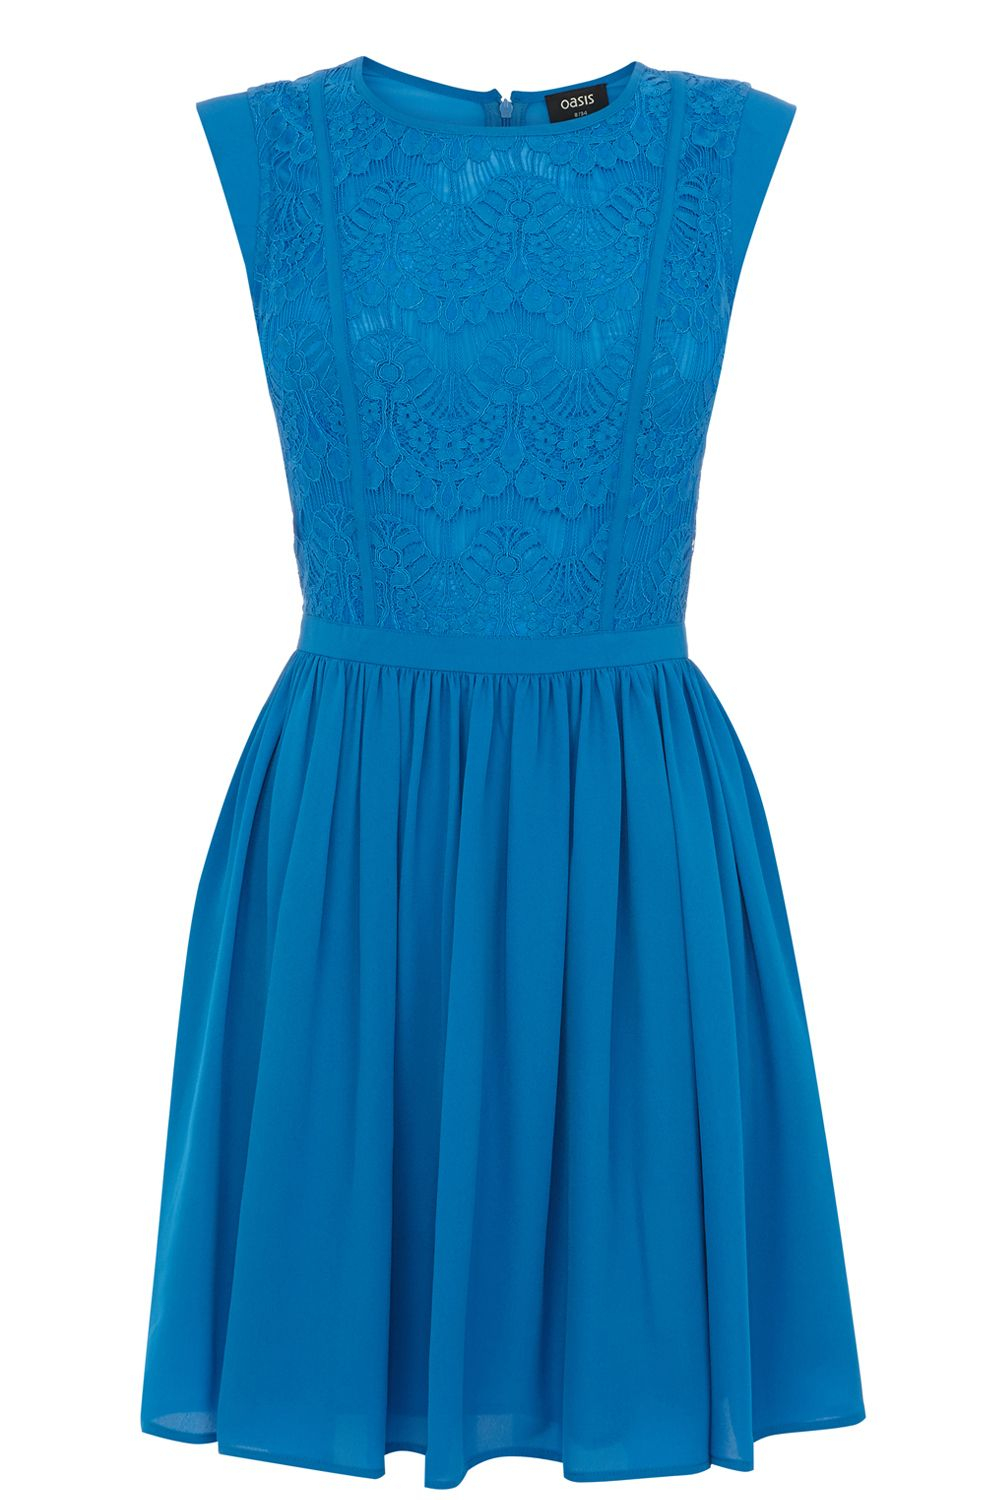 Oasis Scallop Lace Bodice Dress in Blue | Lyst